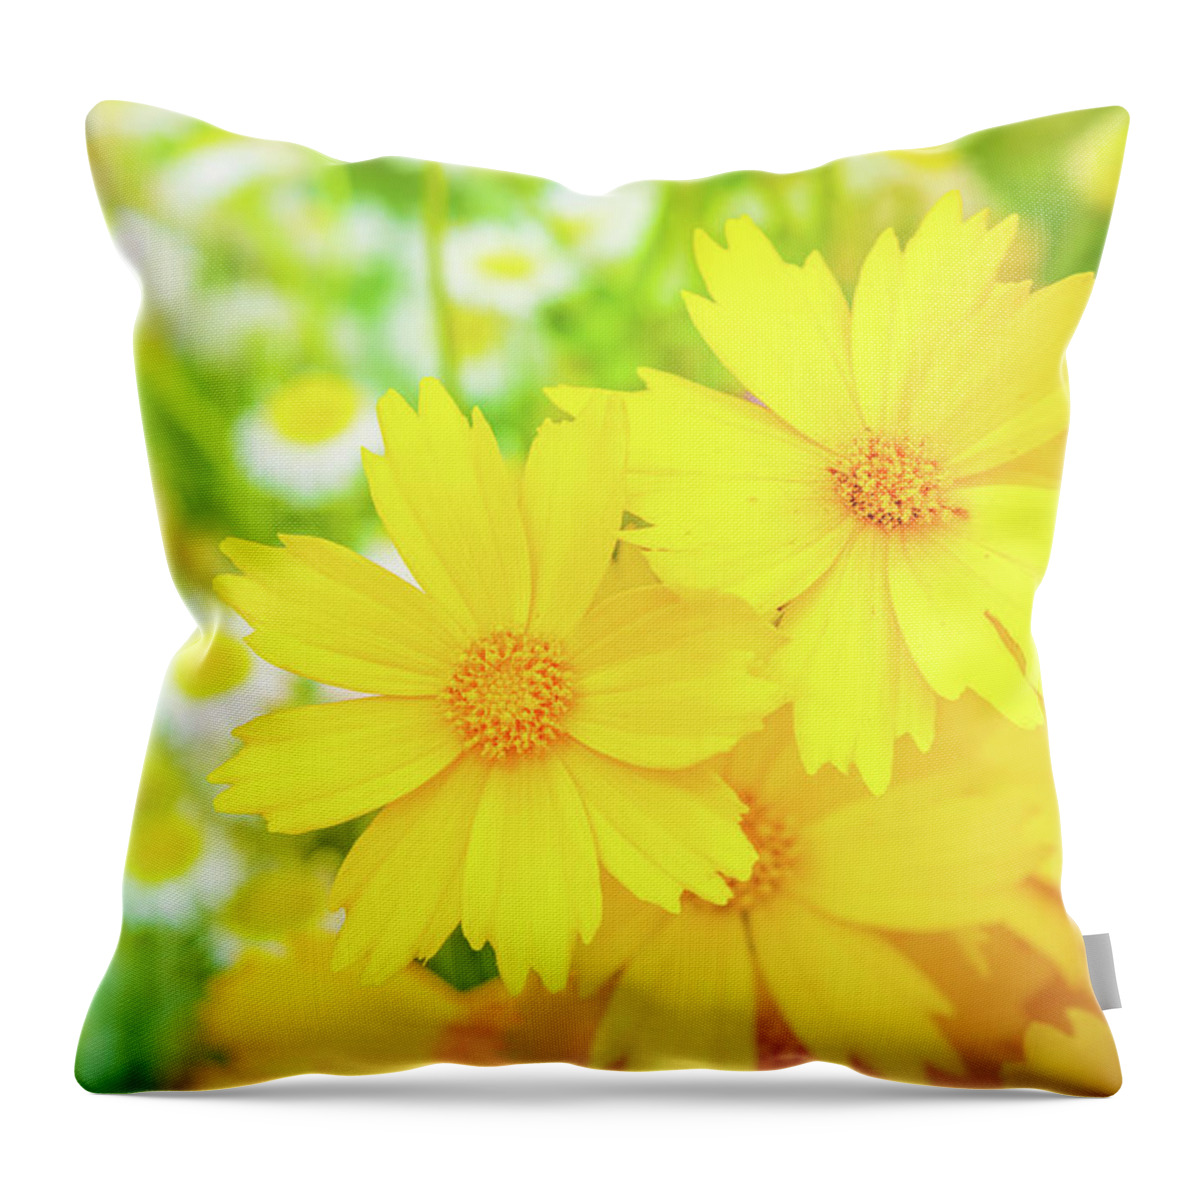 Flowers Throw Pillow featuring the photograph Field Of Spring Flowers by Jordan Hill